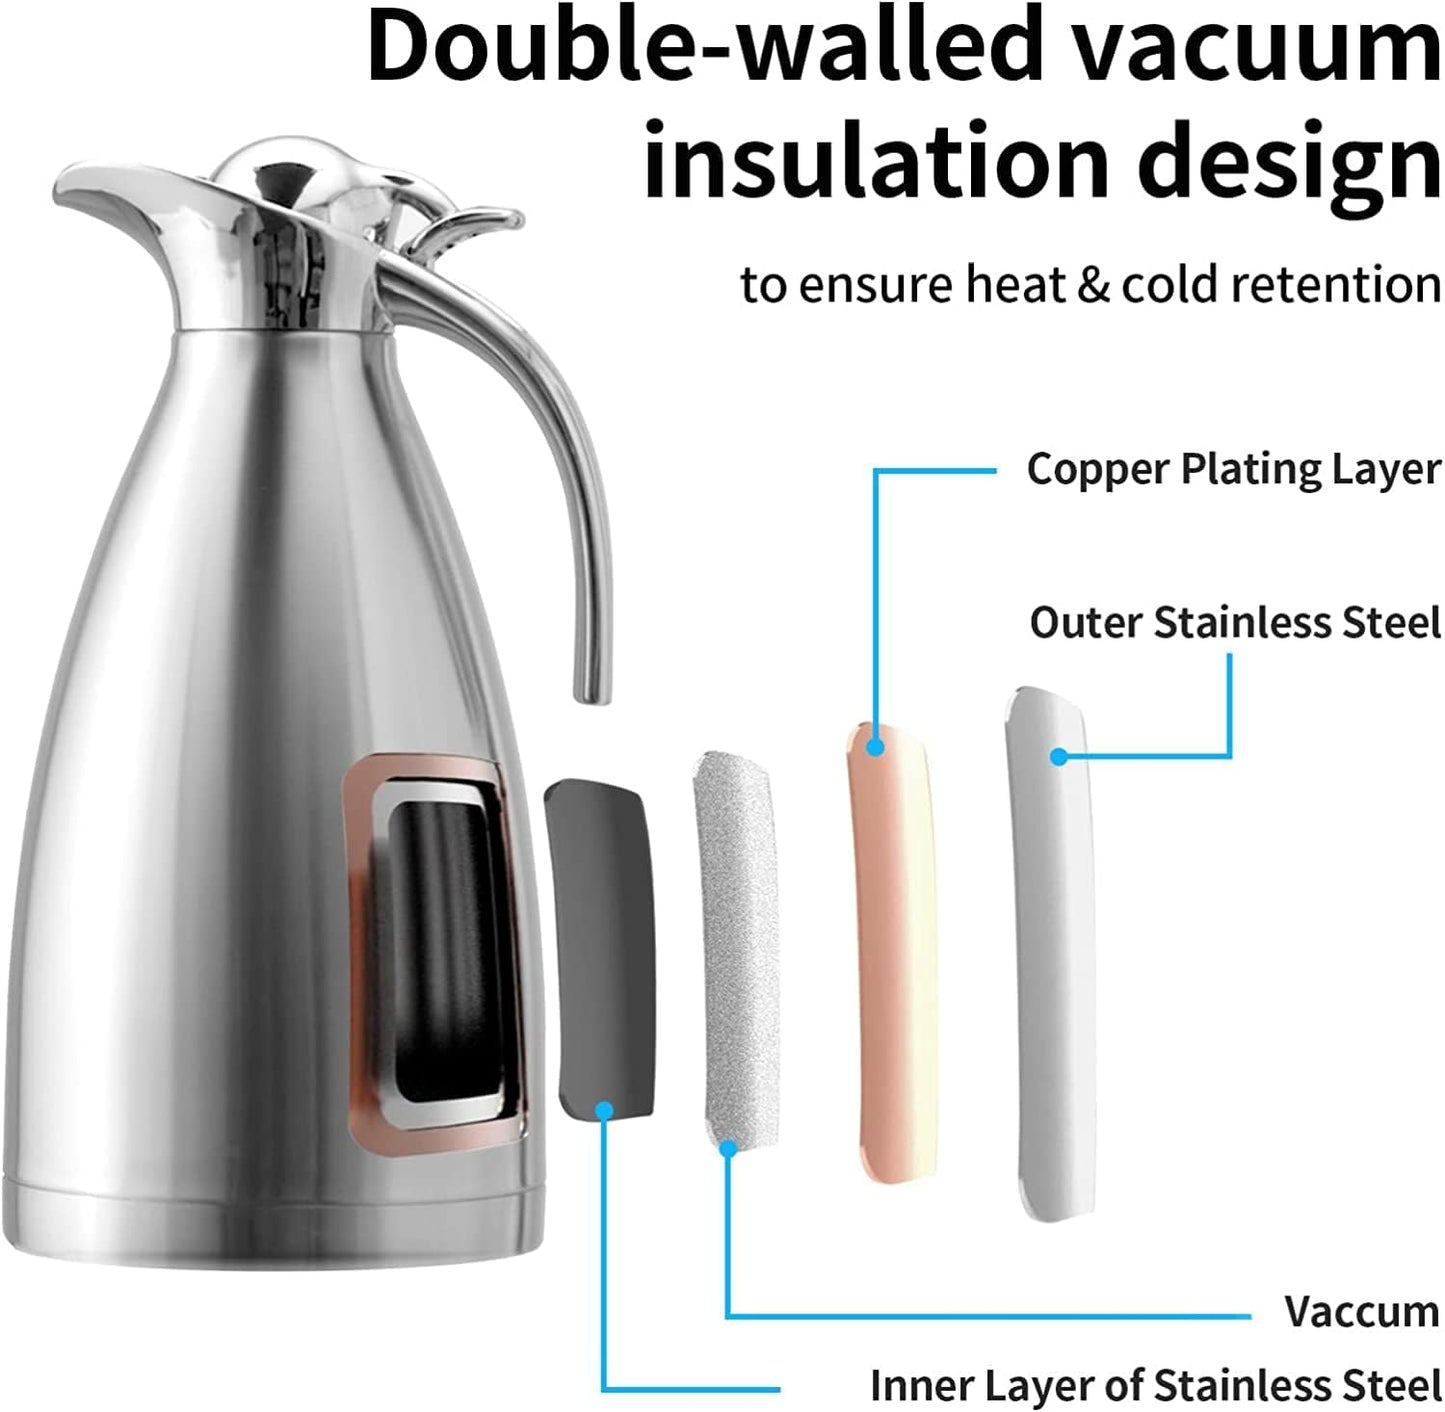 2 Litre Thermal Carafe Jug, 304 Food-Grade Stainless Steel Double Walled Vacuum Insulated